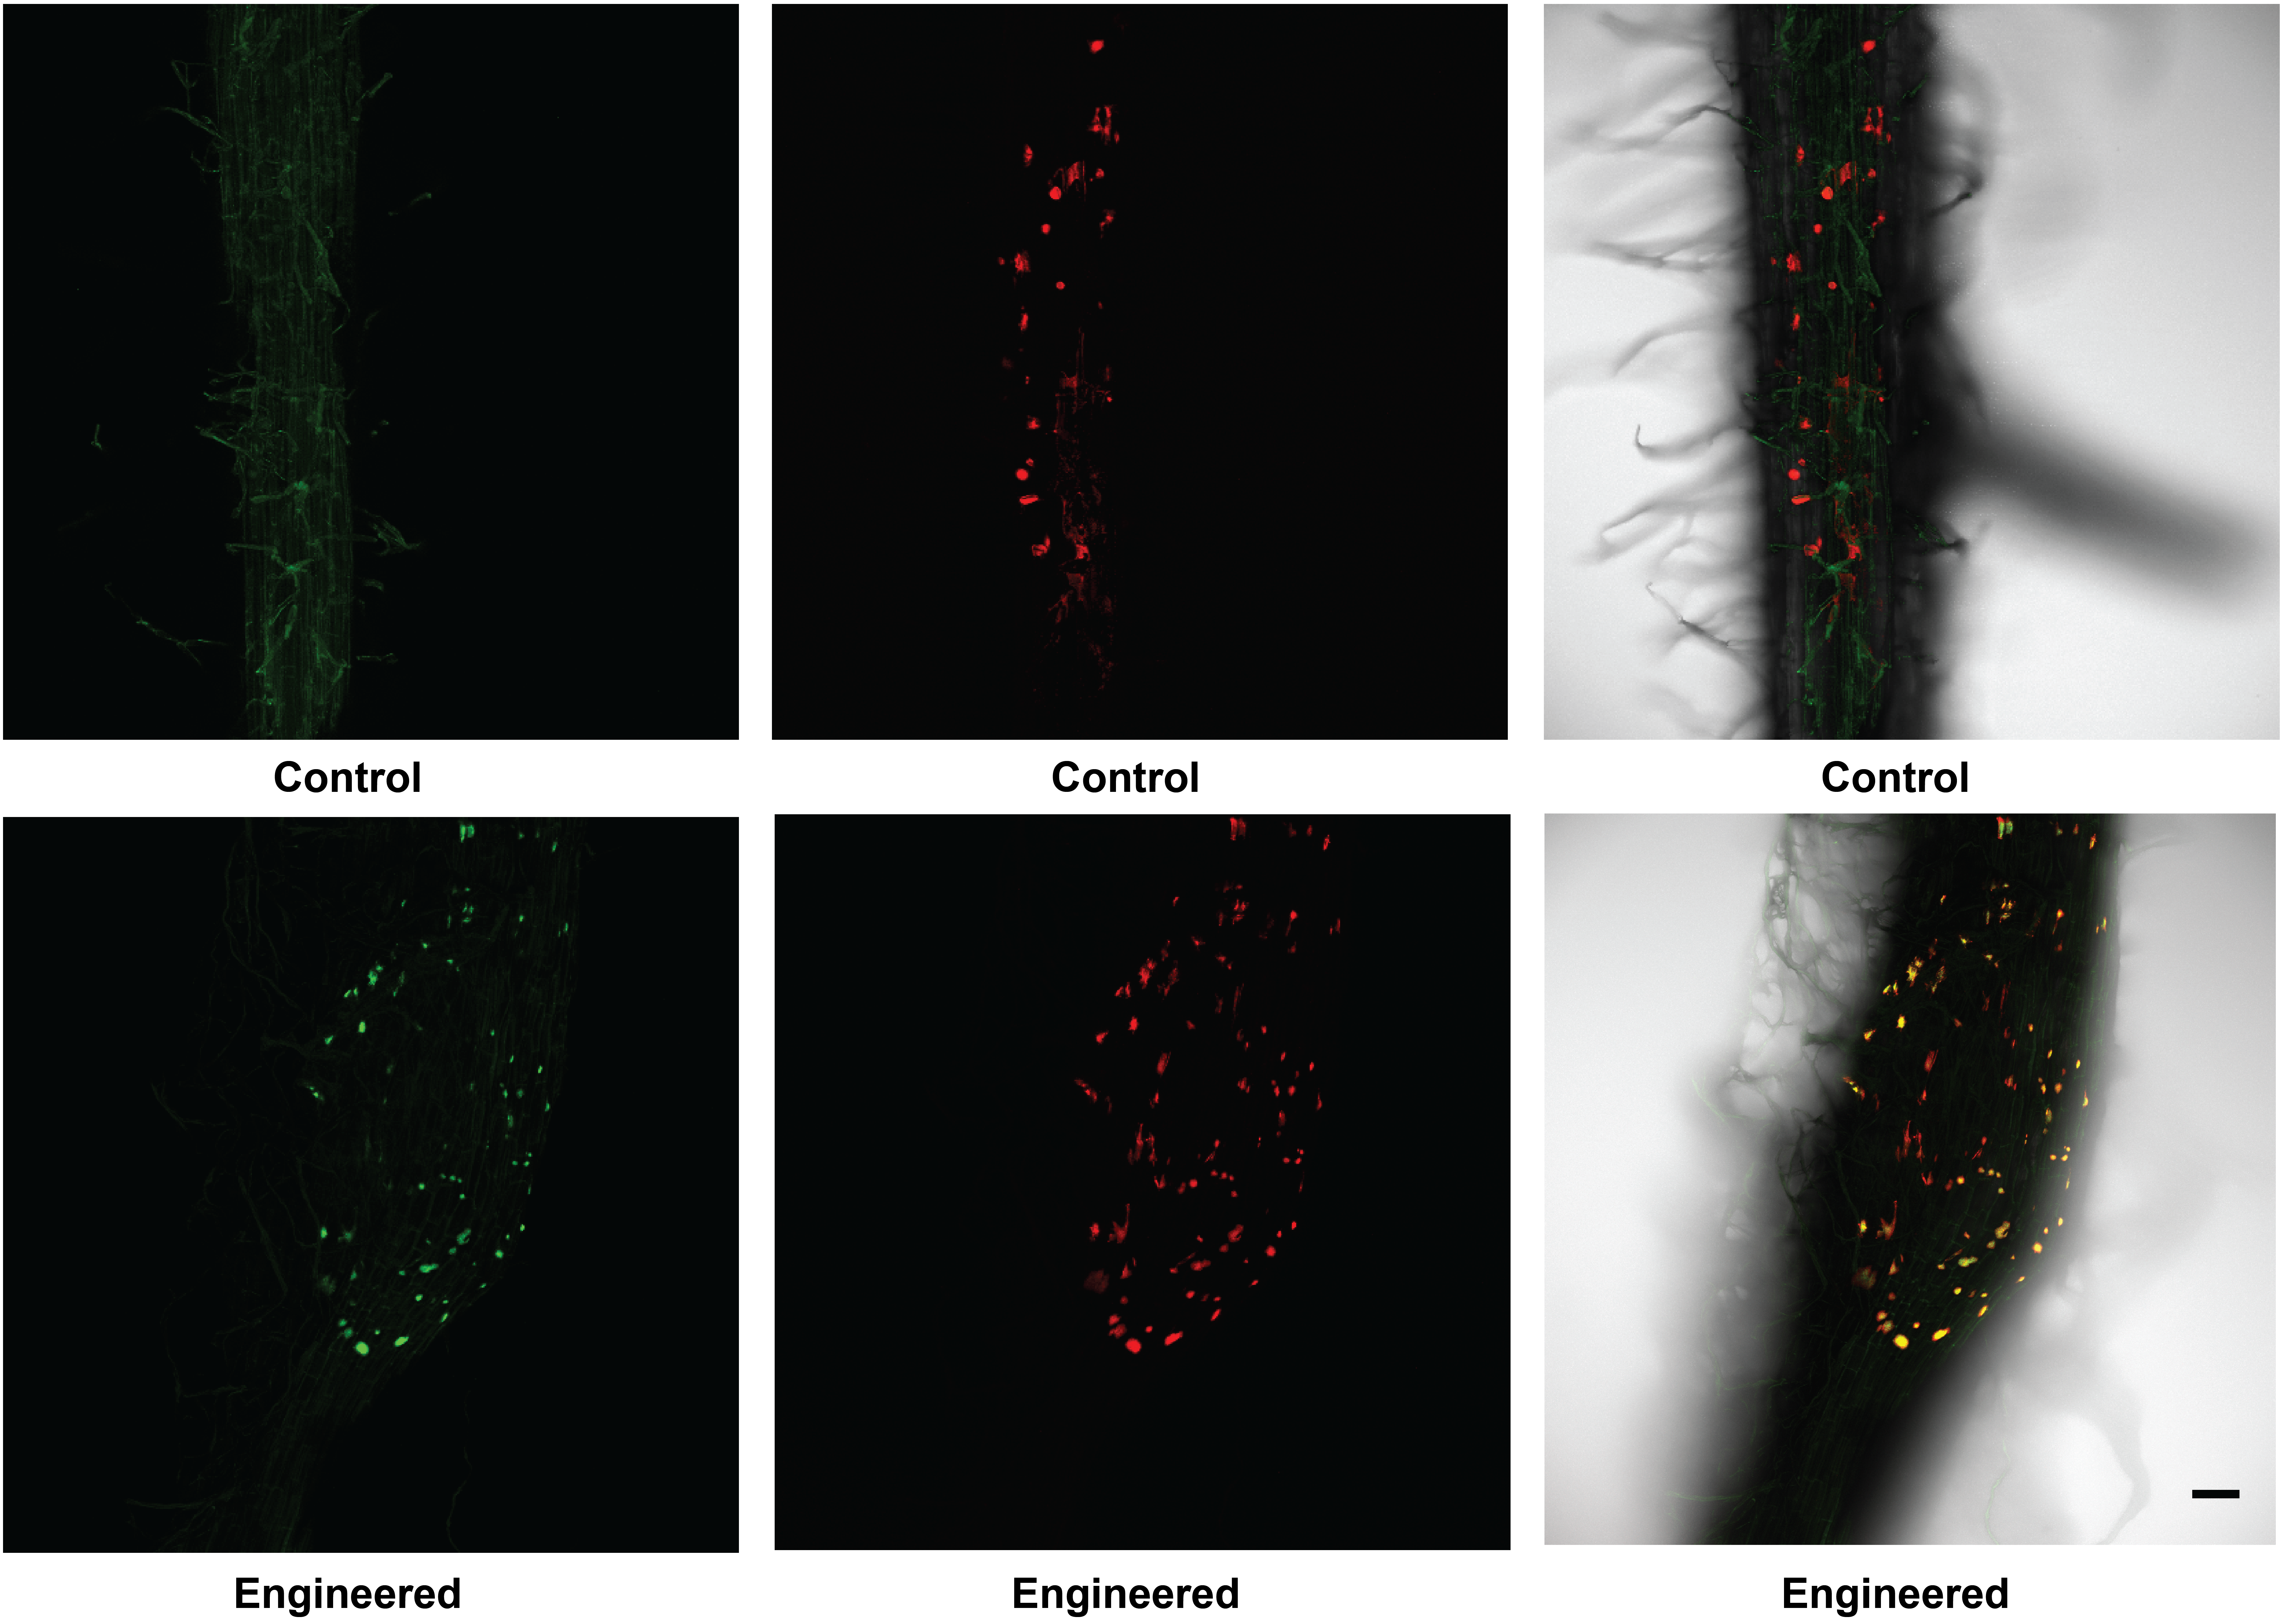 Rhizopine mediated bioluminescence (top) and GFP fluorescence (bottom) signalling occurring in lux and GFP biosensor bacterial colonies on the surface of transgenic barley seedlings.